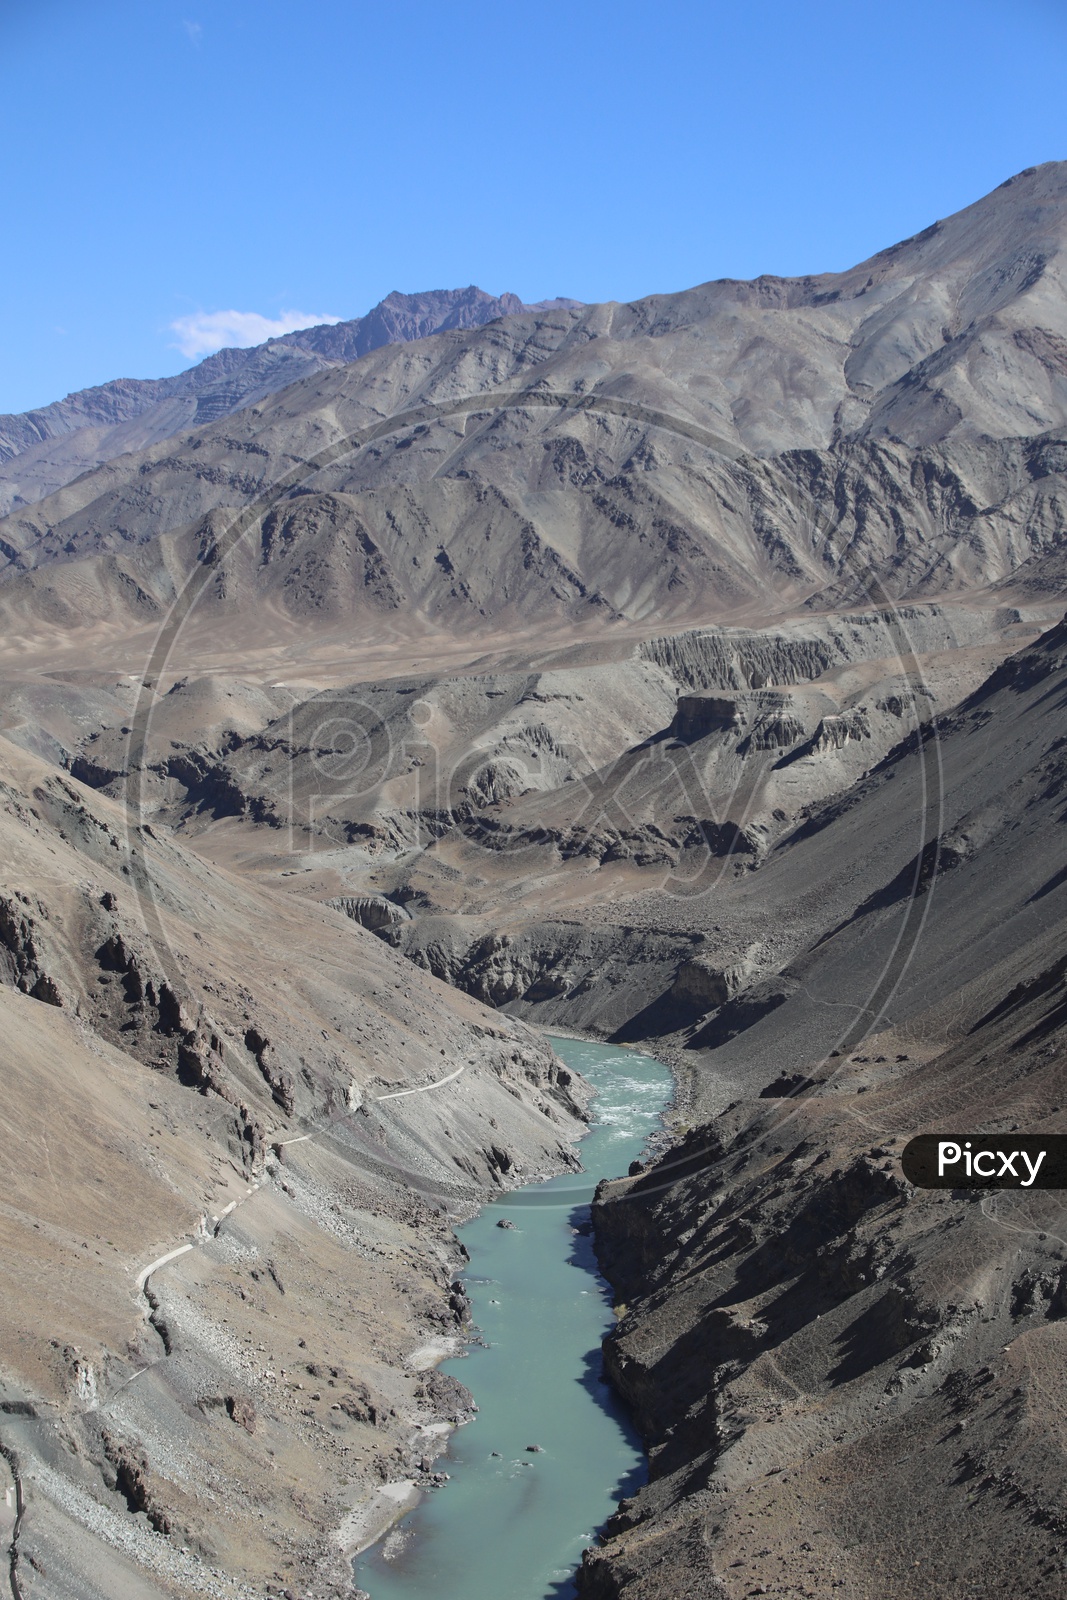 Beautiful Mountains of Leh with lake in the foreground